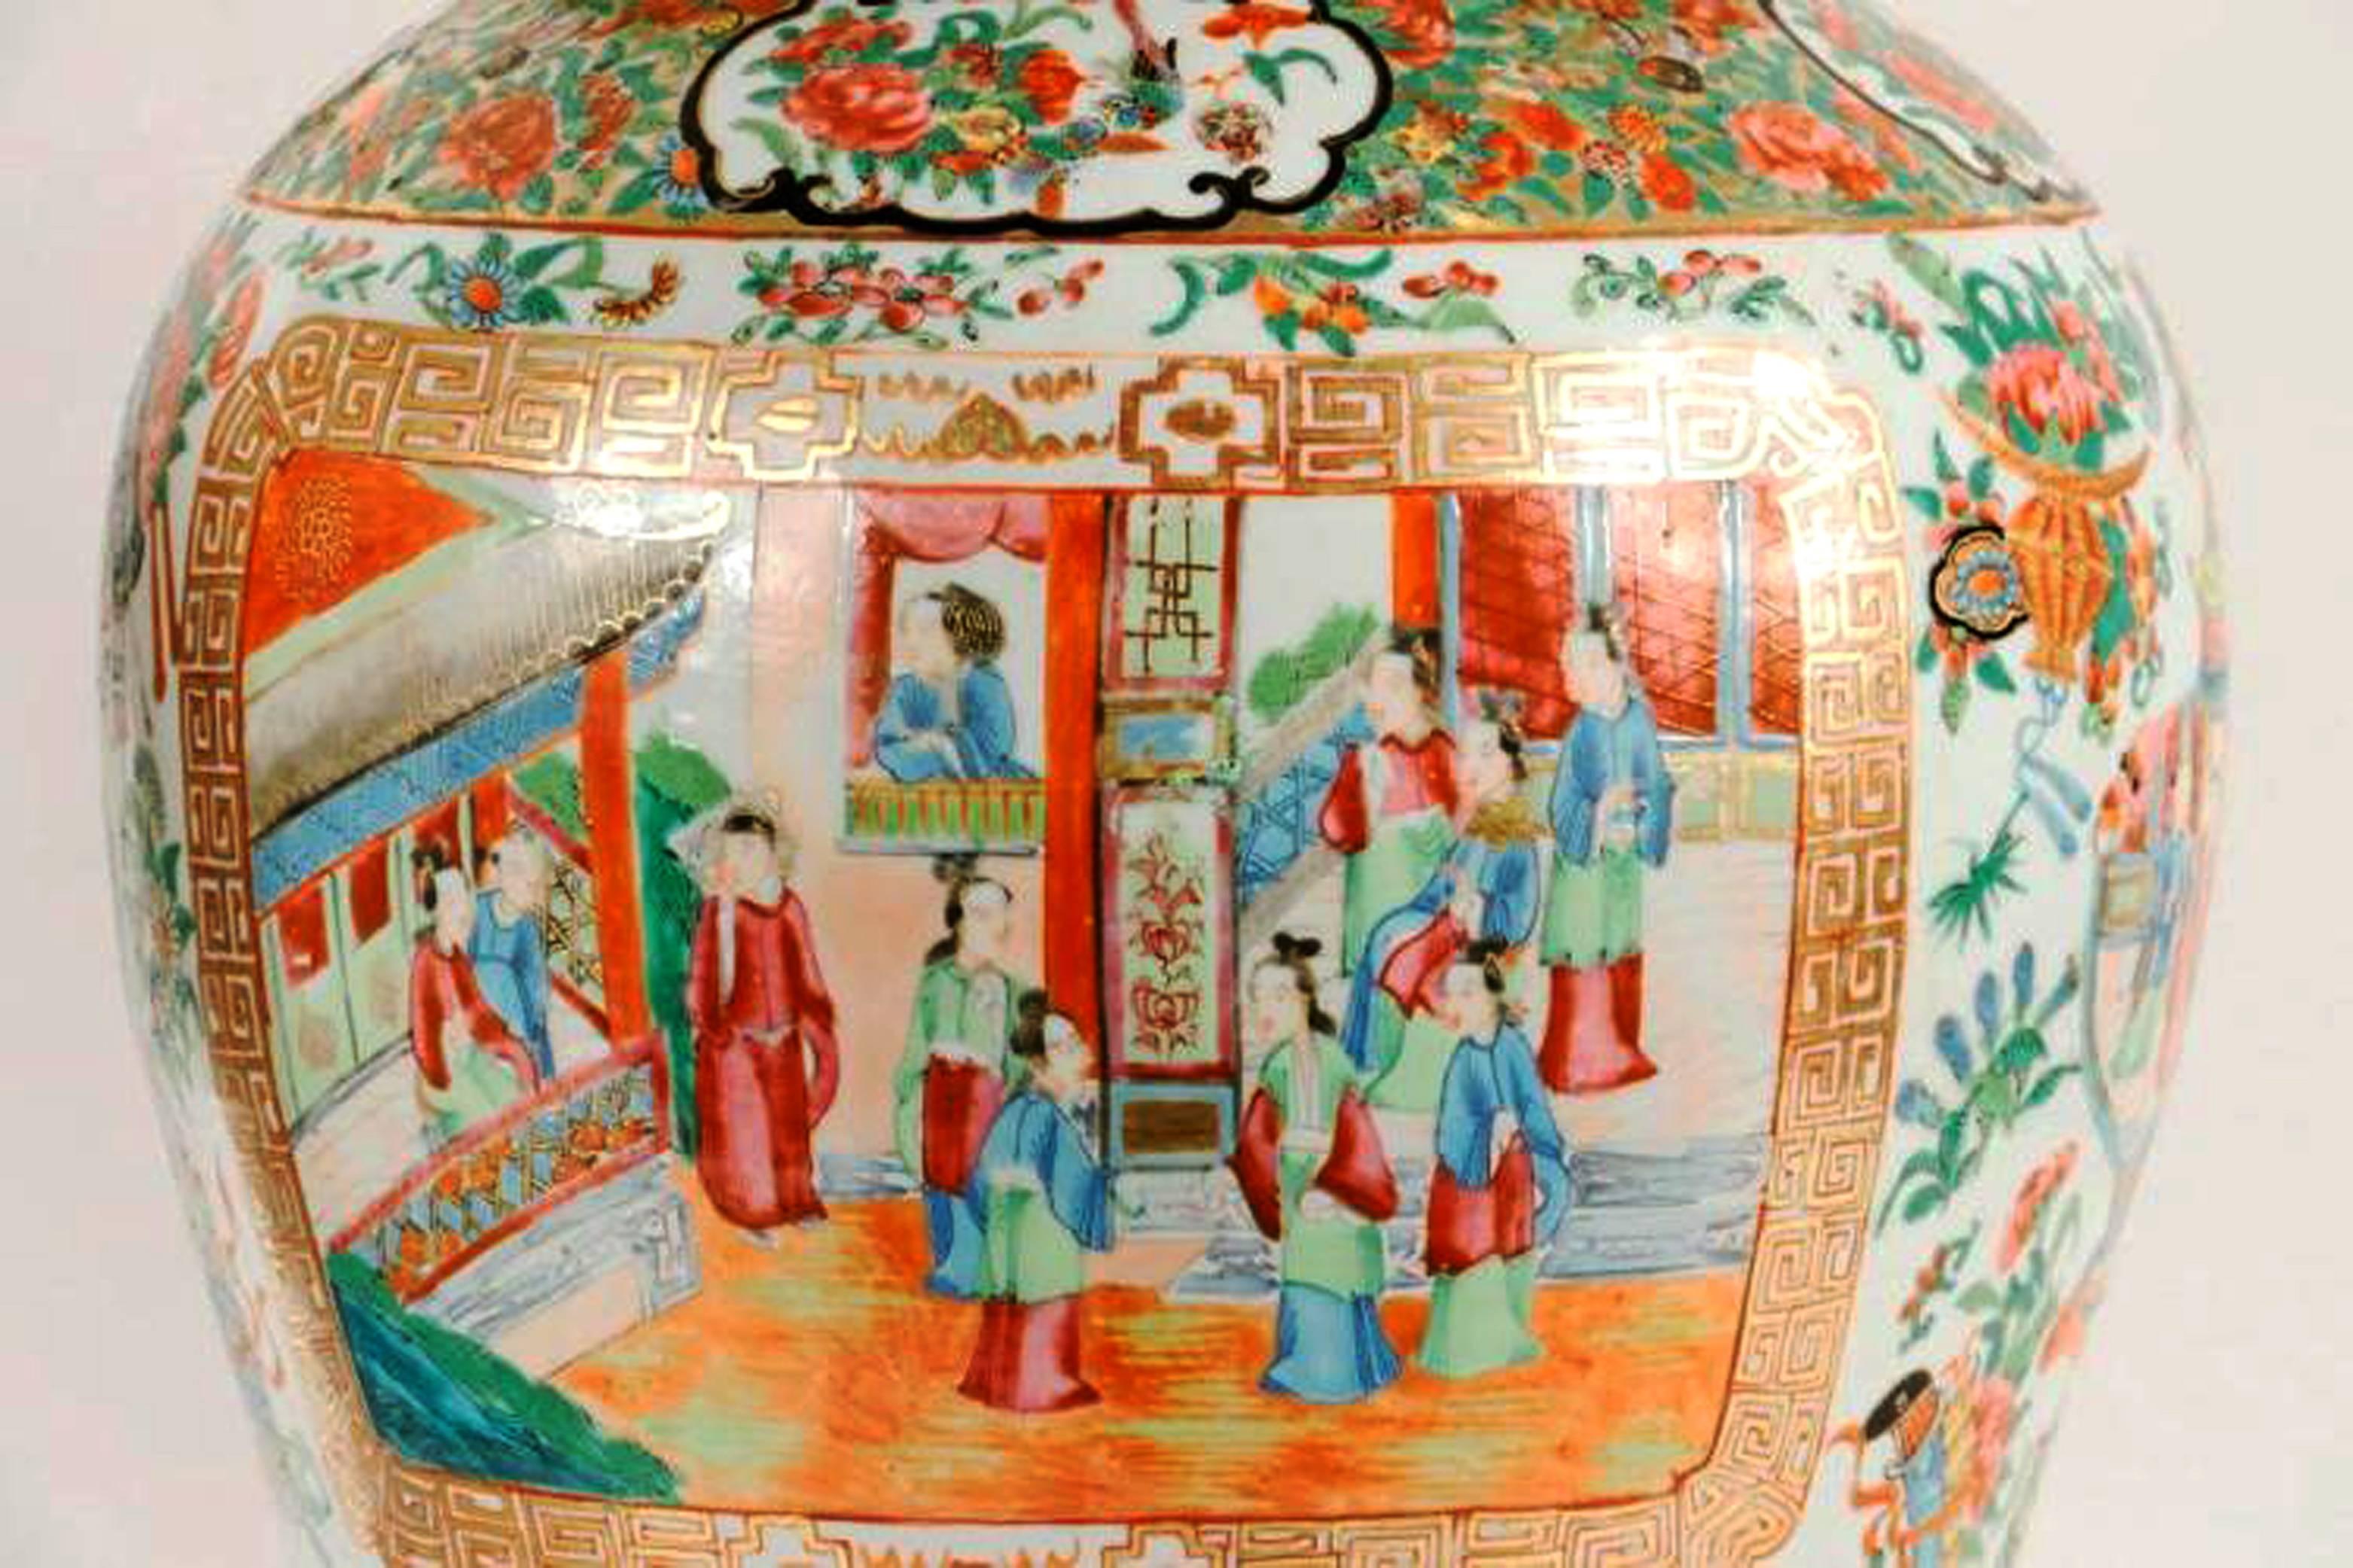 Pair of Chinese export porcelain canton vases and covers,
circa 1840.

The Chinese export porcelain cylindrical vases or urns and covers are decorated with enamelled figural court scenes in panels surrounded by flowers, scholar tools, and